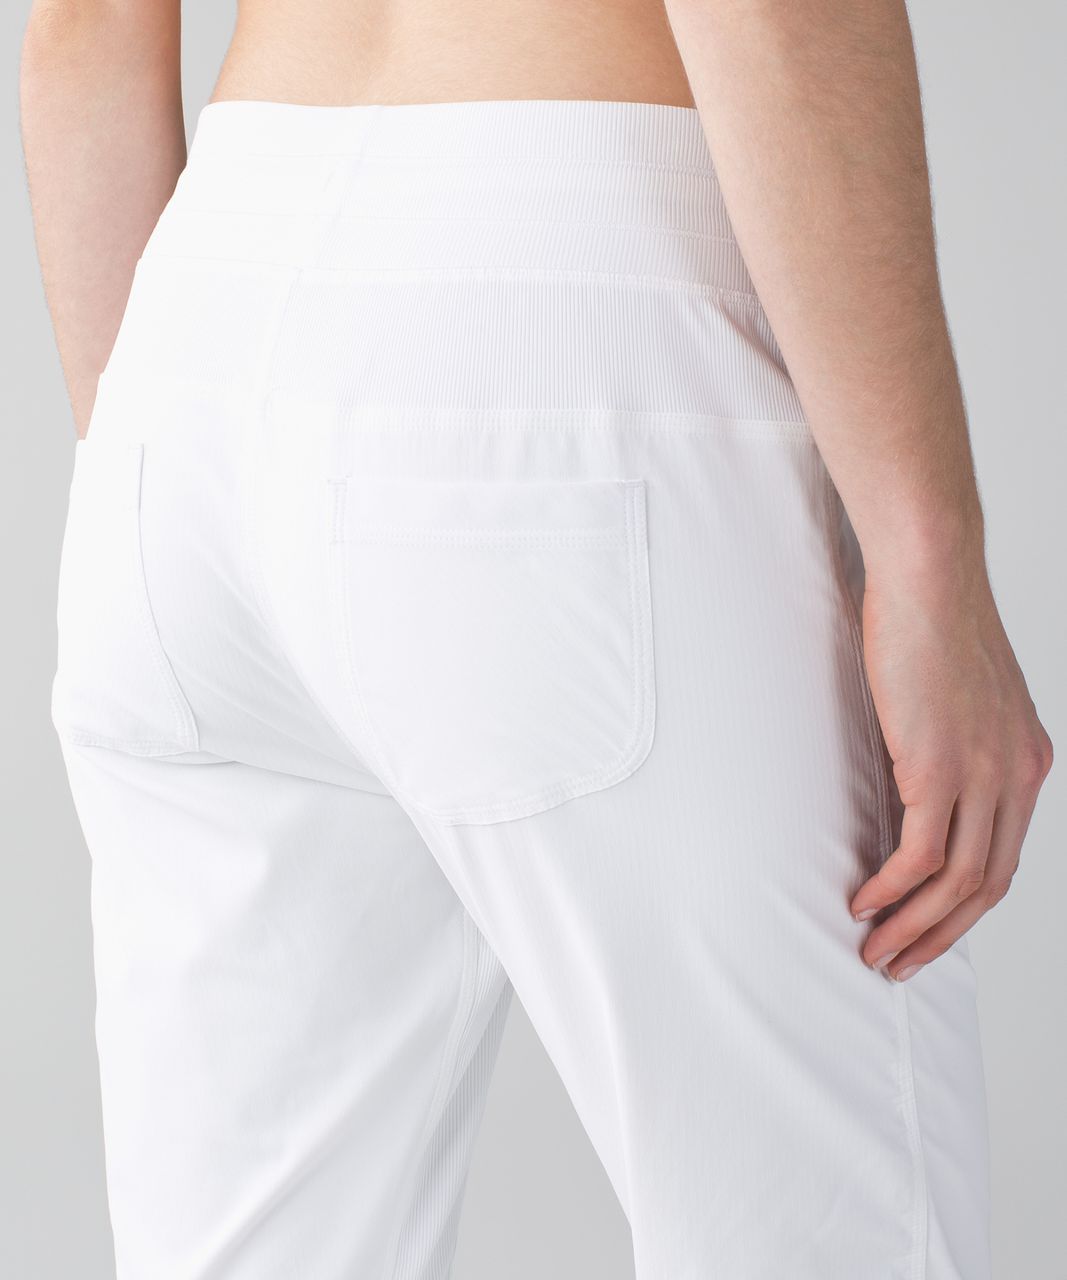 Lululemon Street To Studio Pant II *Lined 28" - White (First Release)